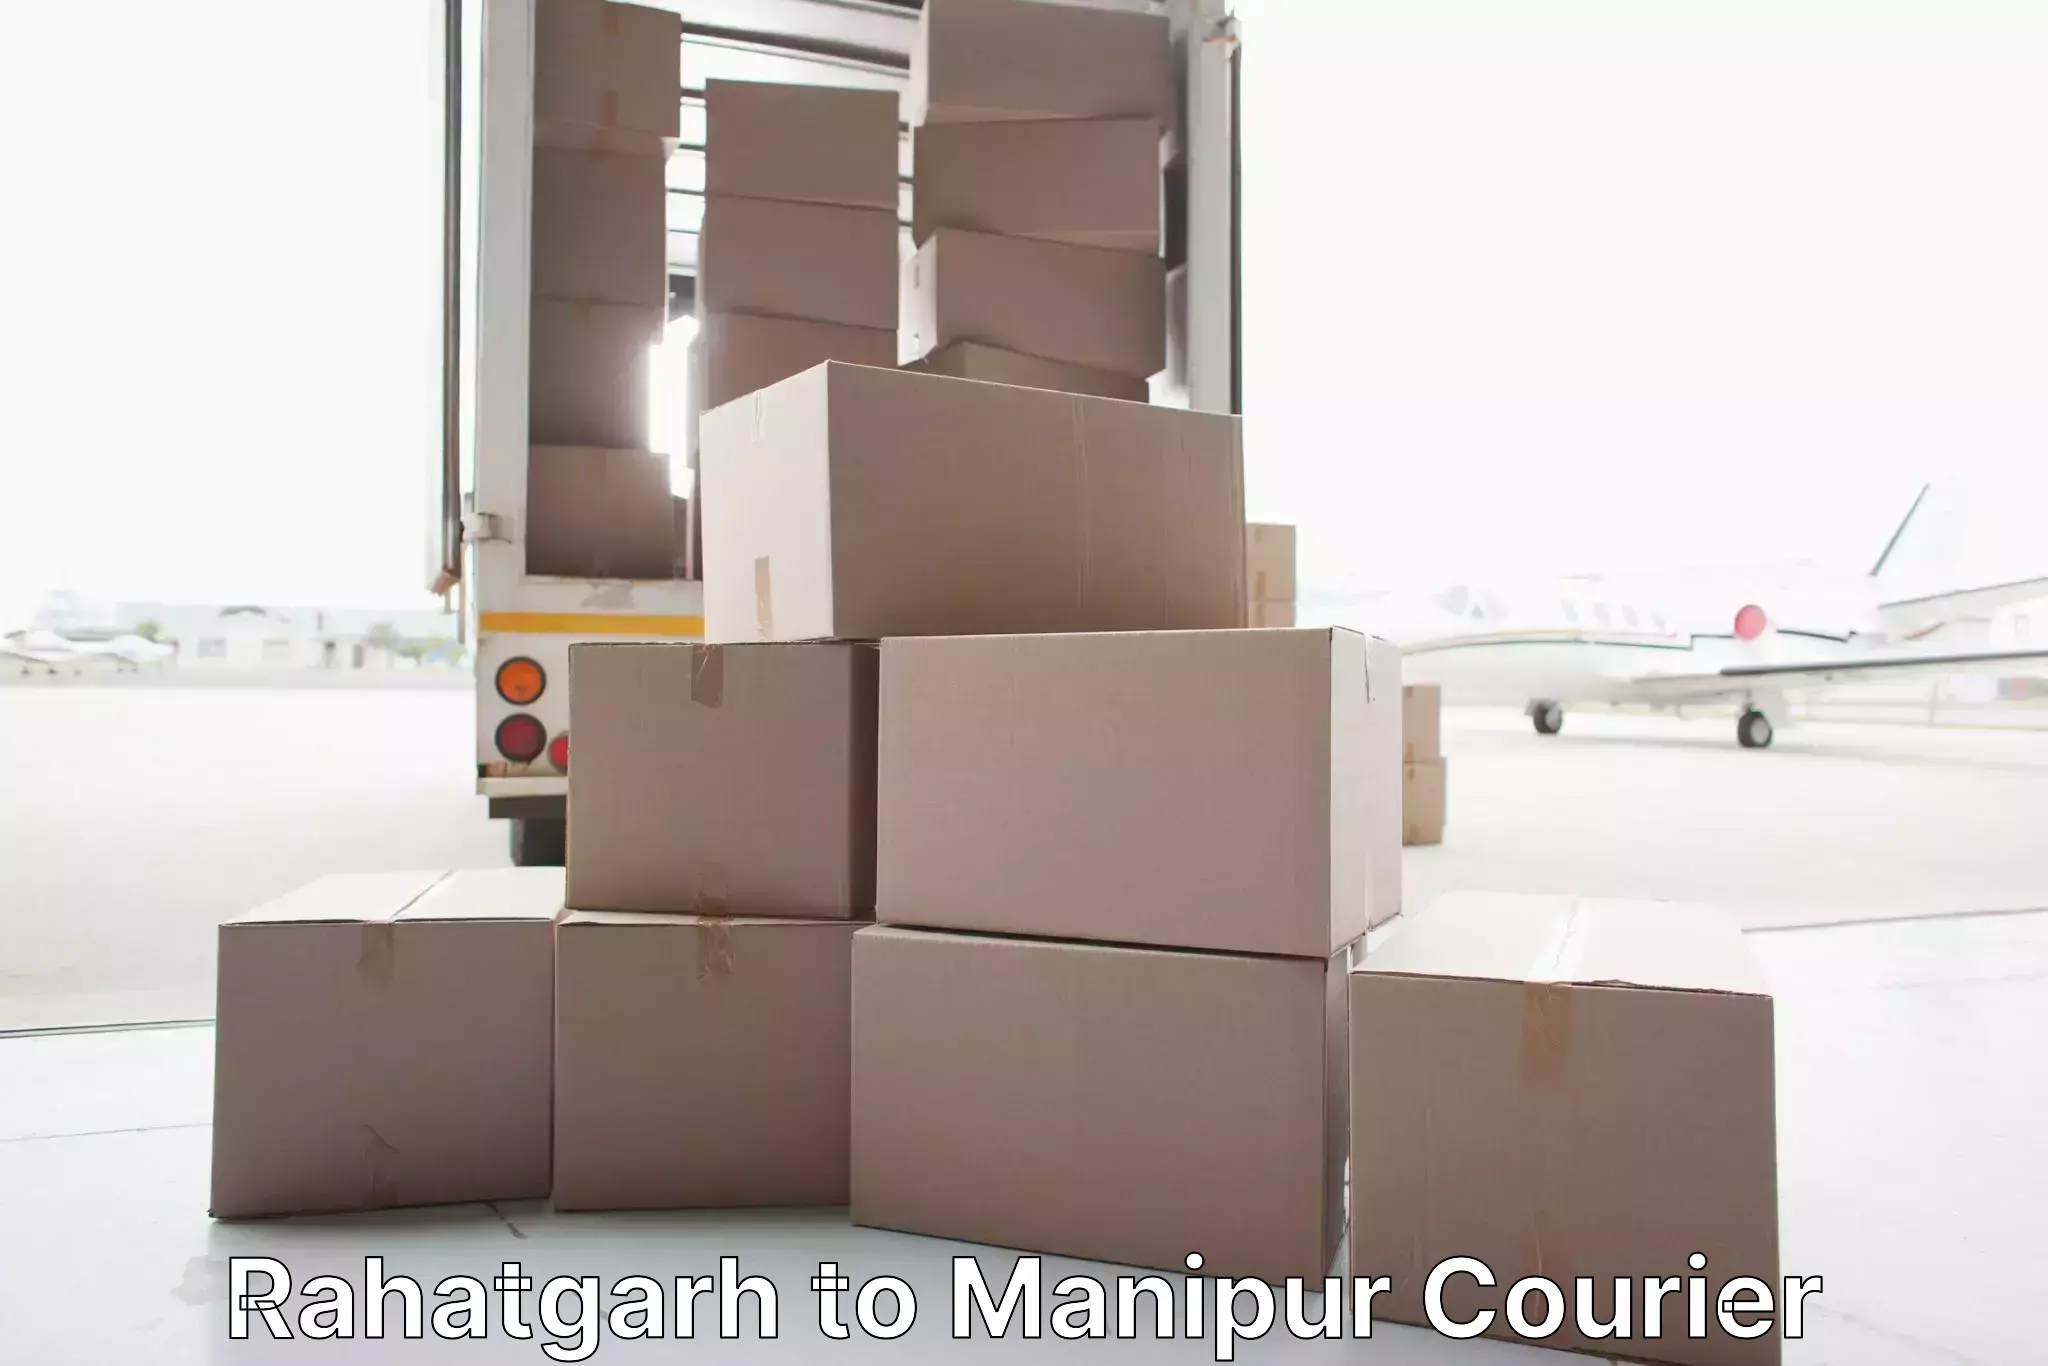 Full-service relocation in Rahatgarh to Kanti